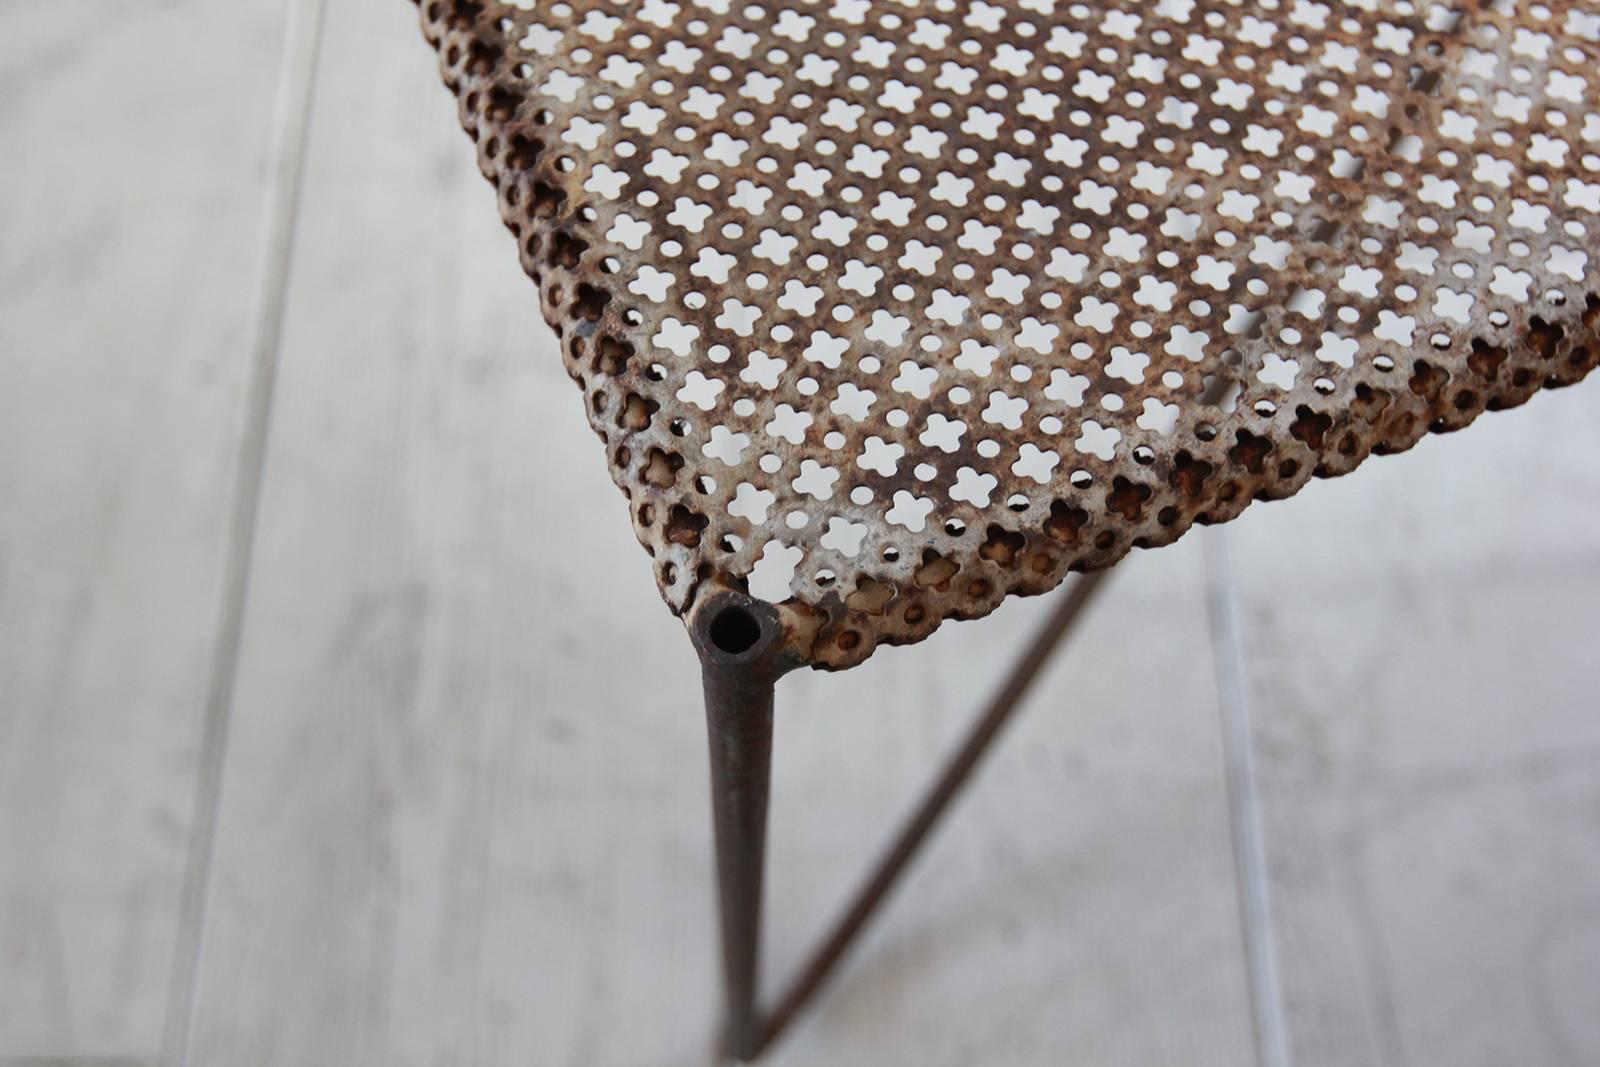 Rustic Perforated Metal Side Table with Angled Legs 1